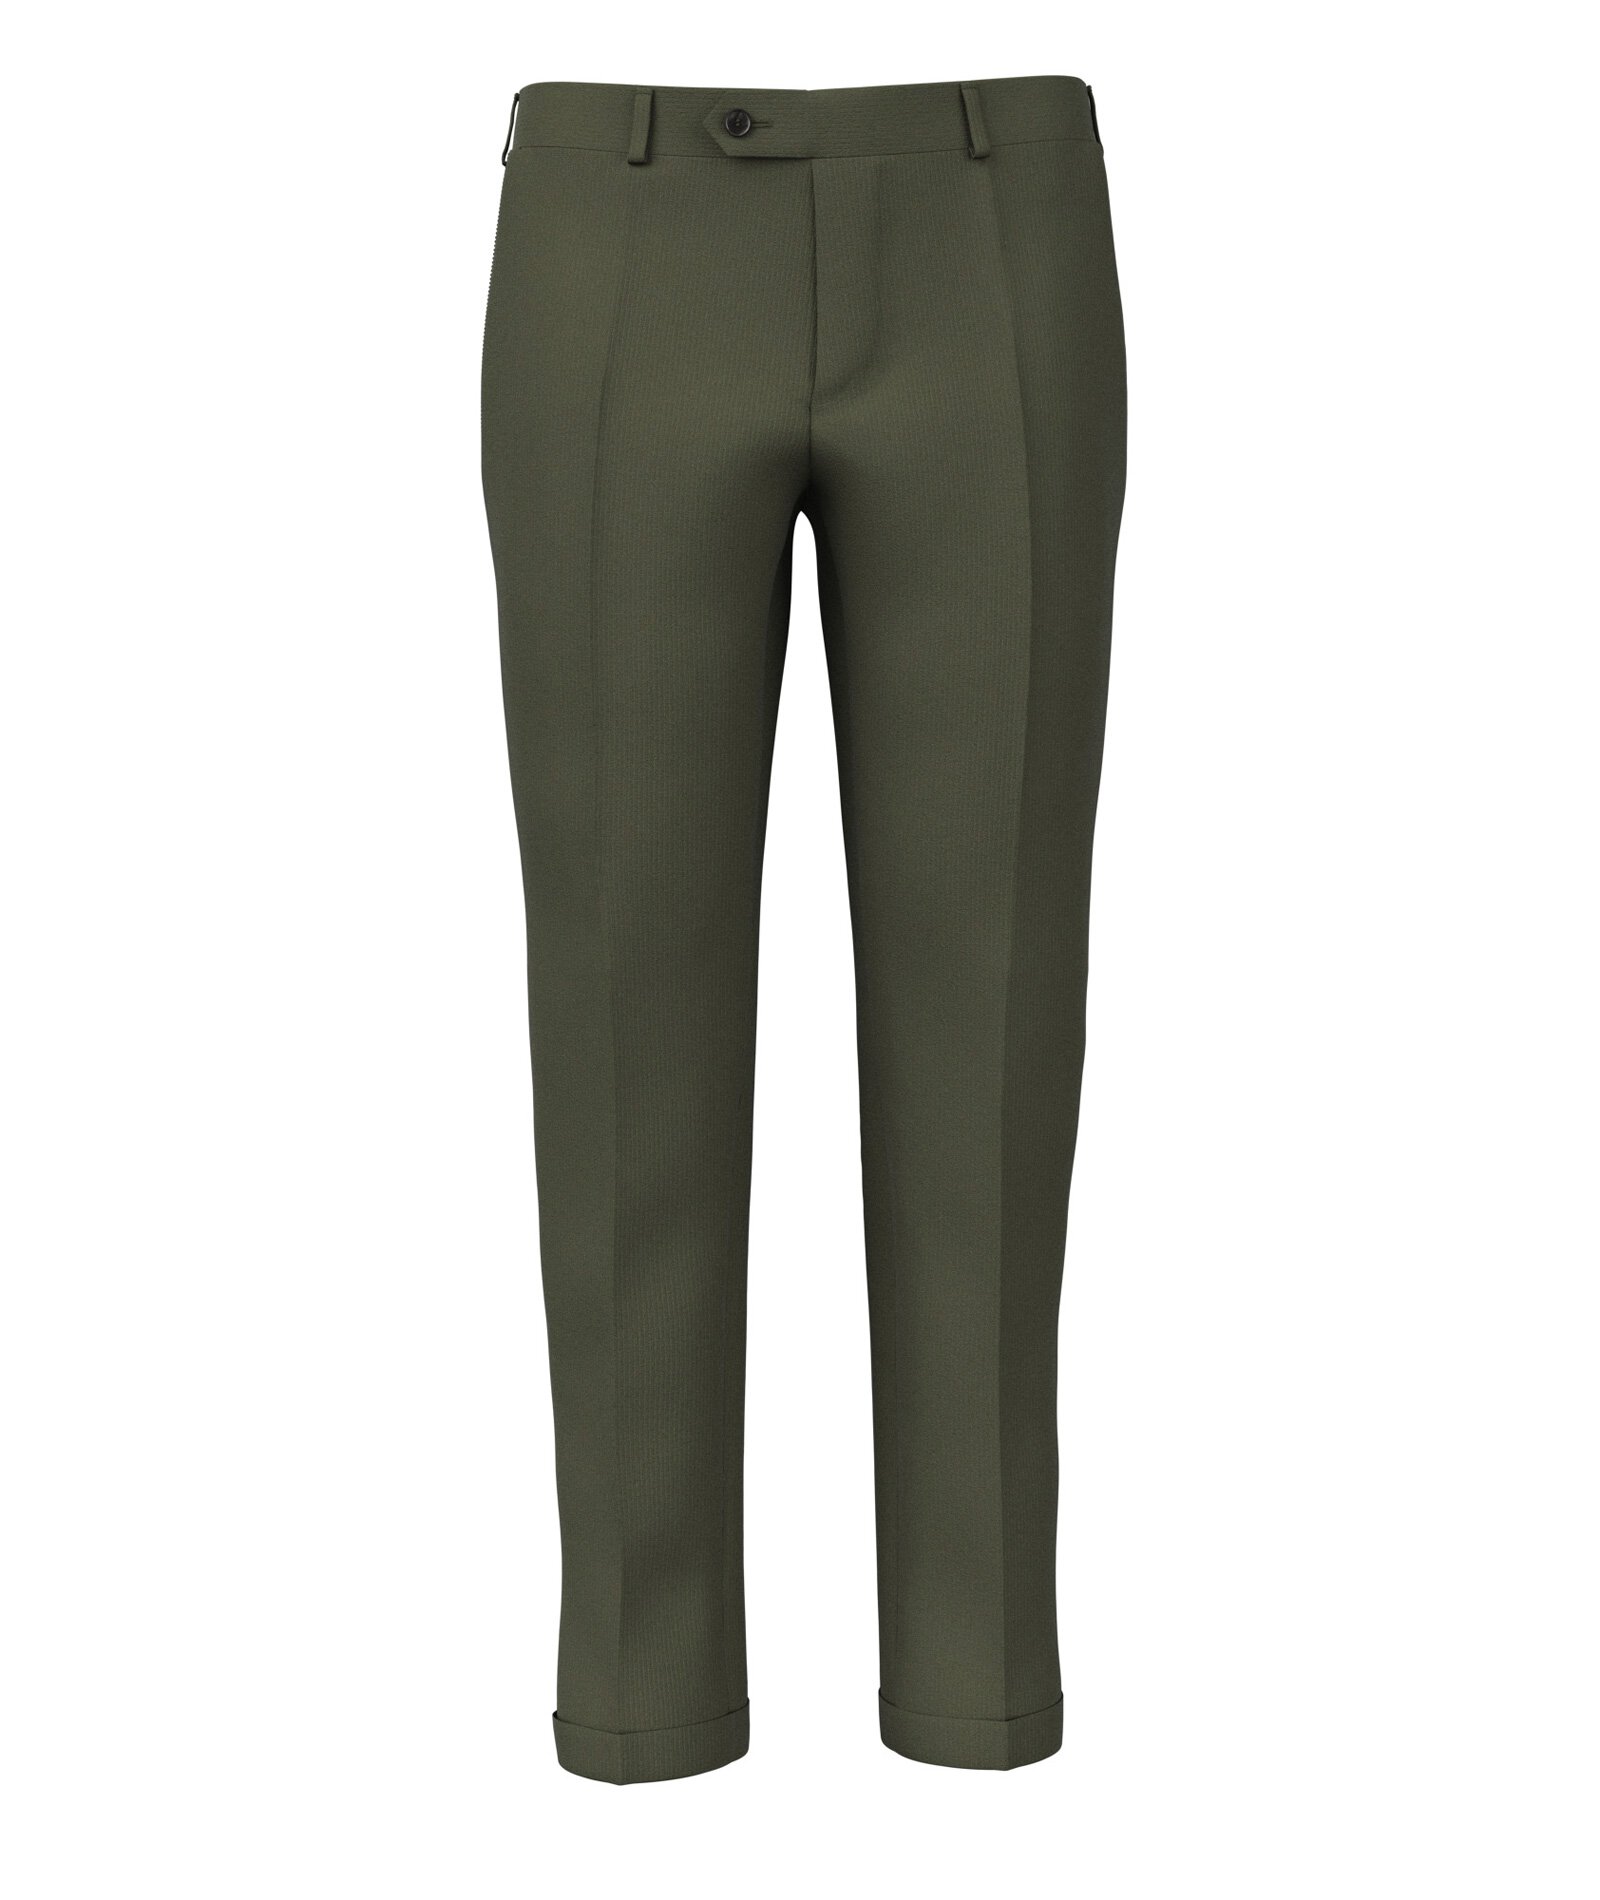 Buy JEENAY Synthetic Formal Pants for Men | Mens Fashion Wrinkle-free  Stylish Slim Fit Men's Wear Trouser Pant for Office or Party - 28 US, Olive  Green Online at Best Prices in